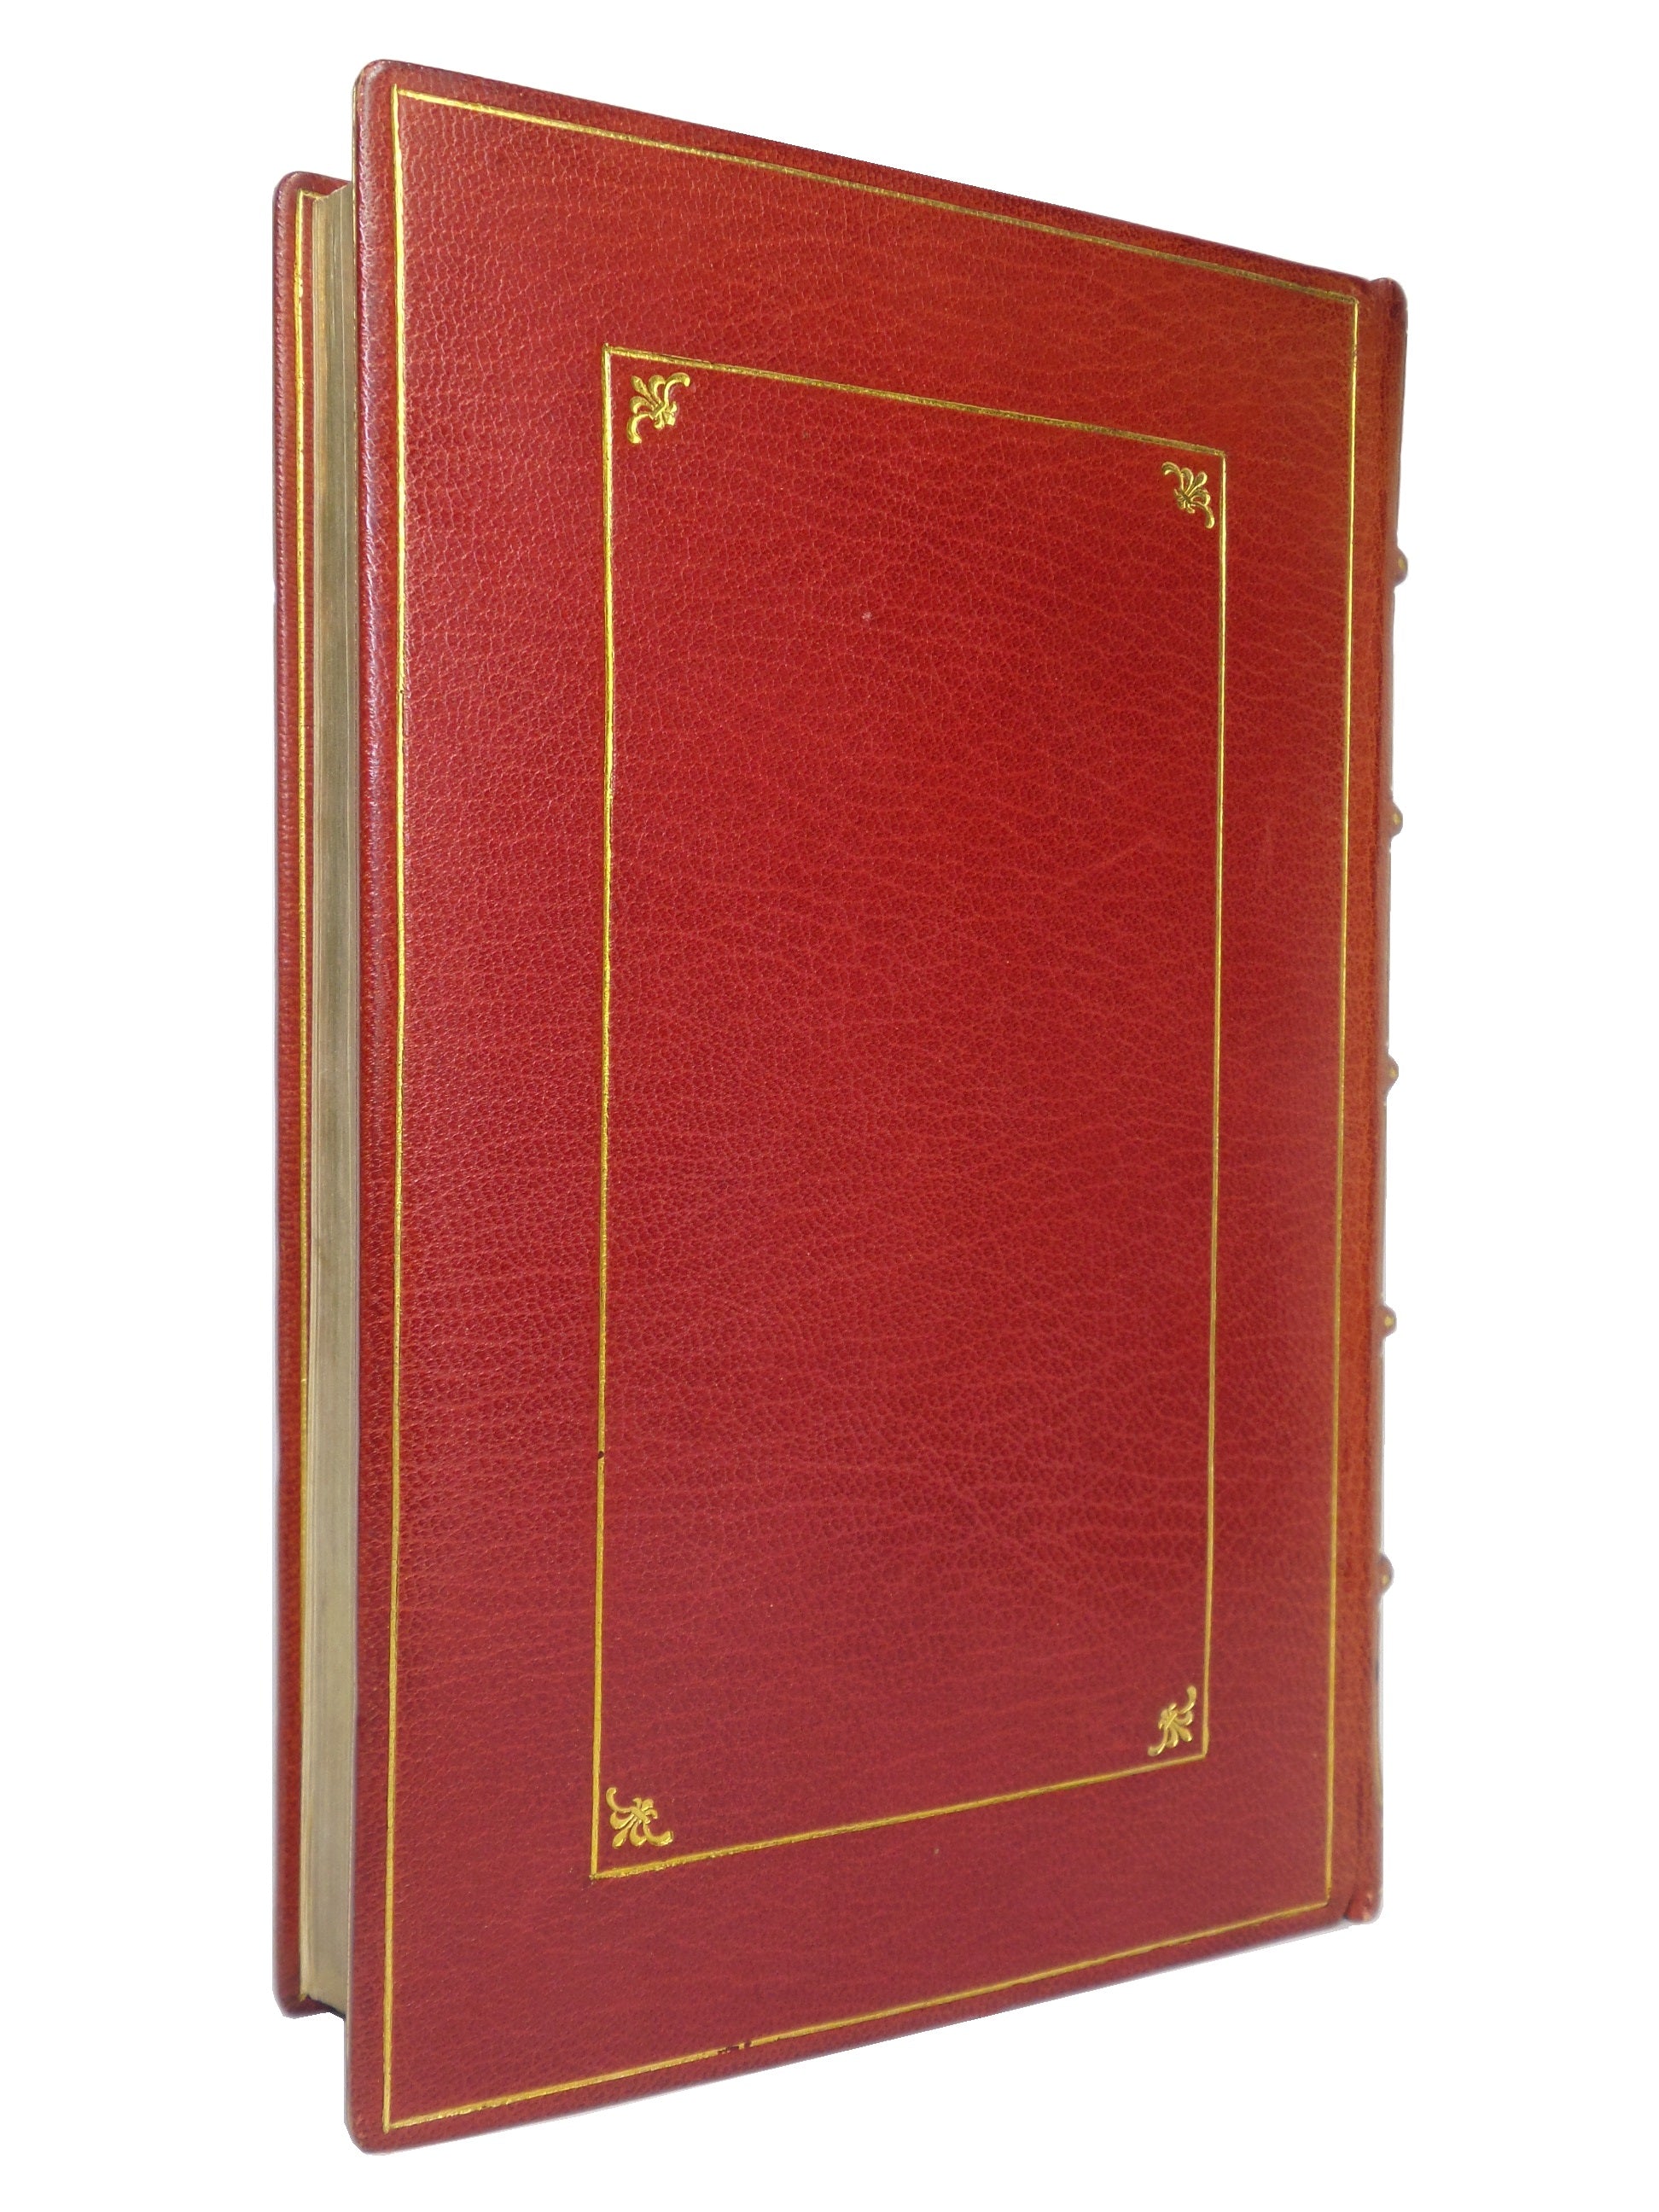 THE OXFORD BOOK OF ENGLISH VERSE 1250-1918 CHOSEN & EDITED BY ARTHUR QUILLER-COUCH, SANGORSKI & SUTCLIFFE BINDING